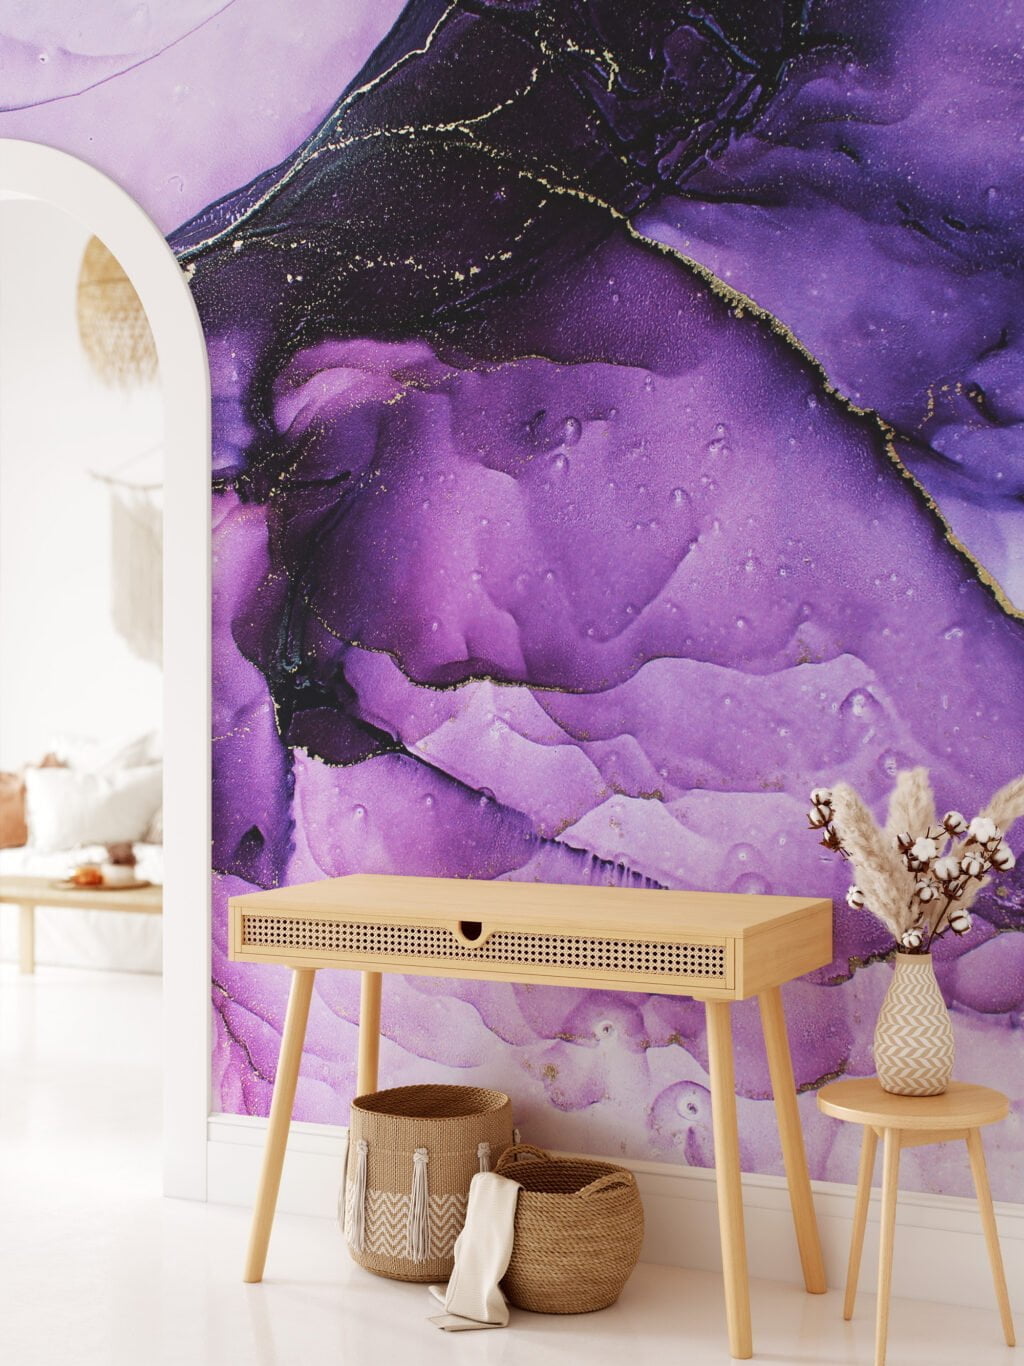 Ethereal and Enchanting Shades of Purple Alcohol Ink Art Wallpaper for a Mesmerizing and Artistic Home Ambience